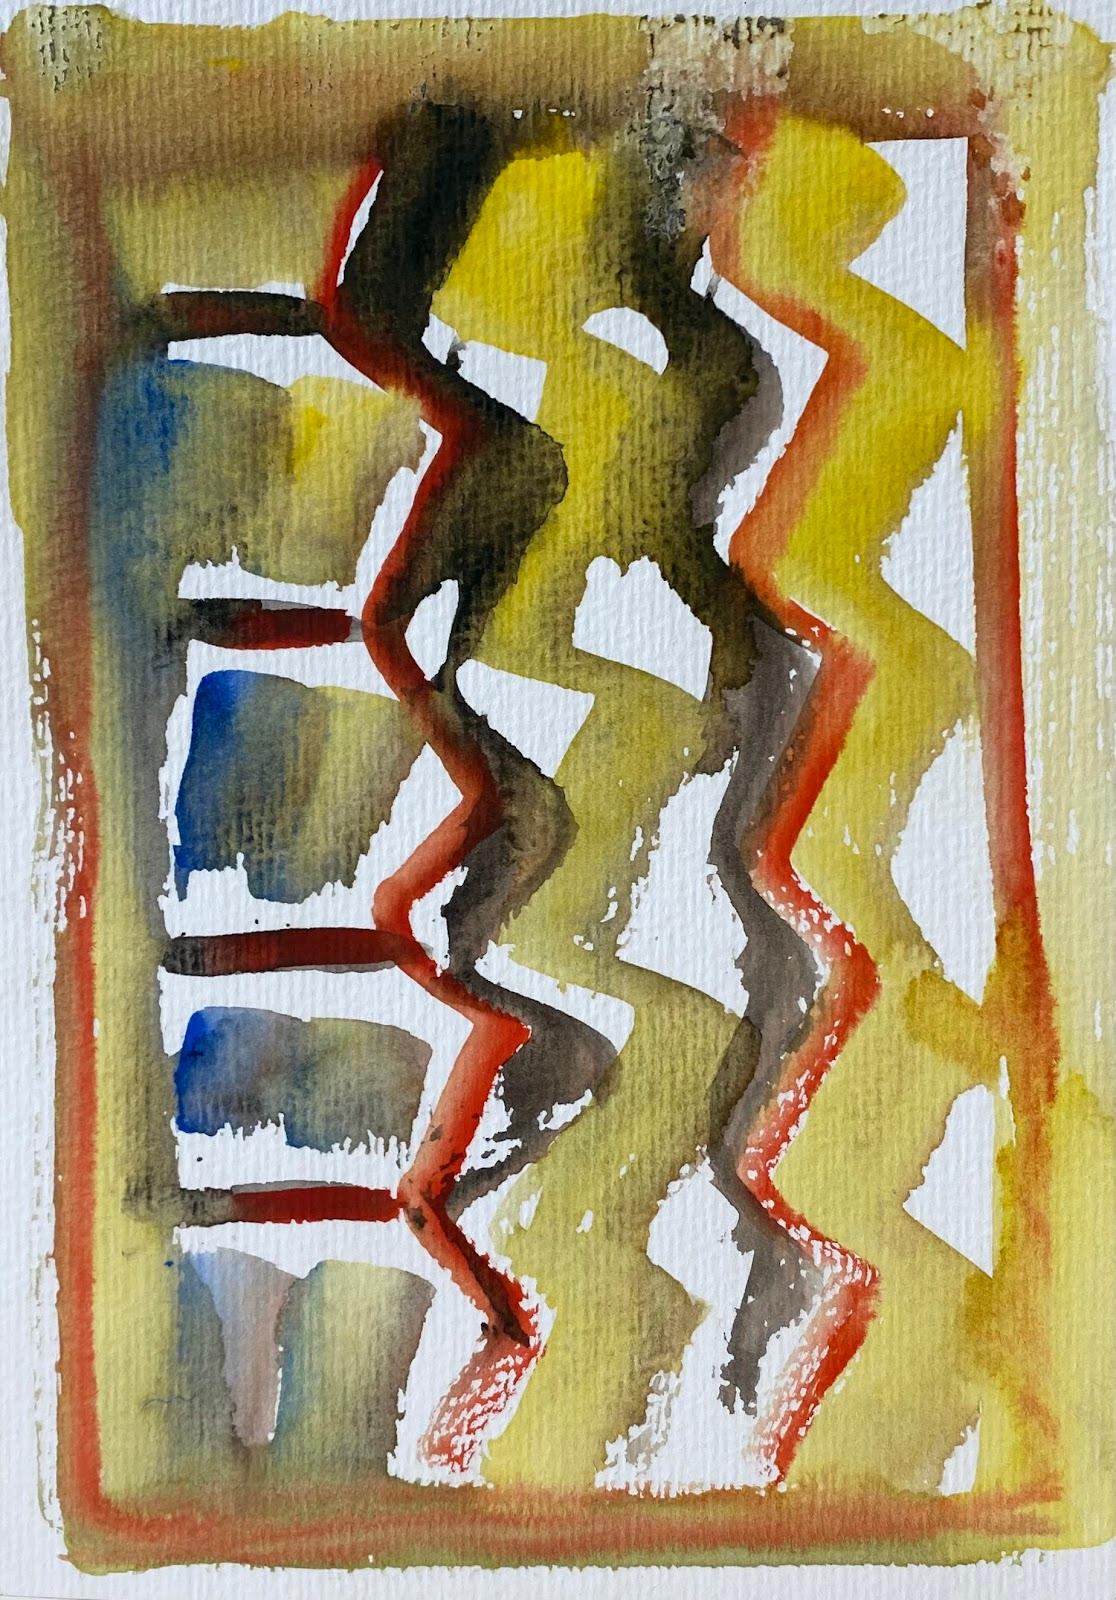 Jacques Coulais (1955-2011) Abstract Drawing - French Expressionist Abstract Original Painting Artists Studio Provenance